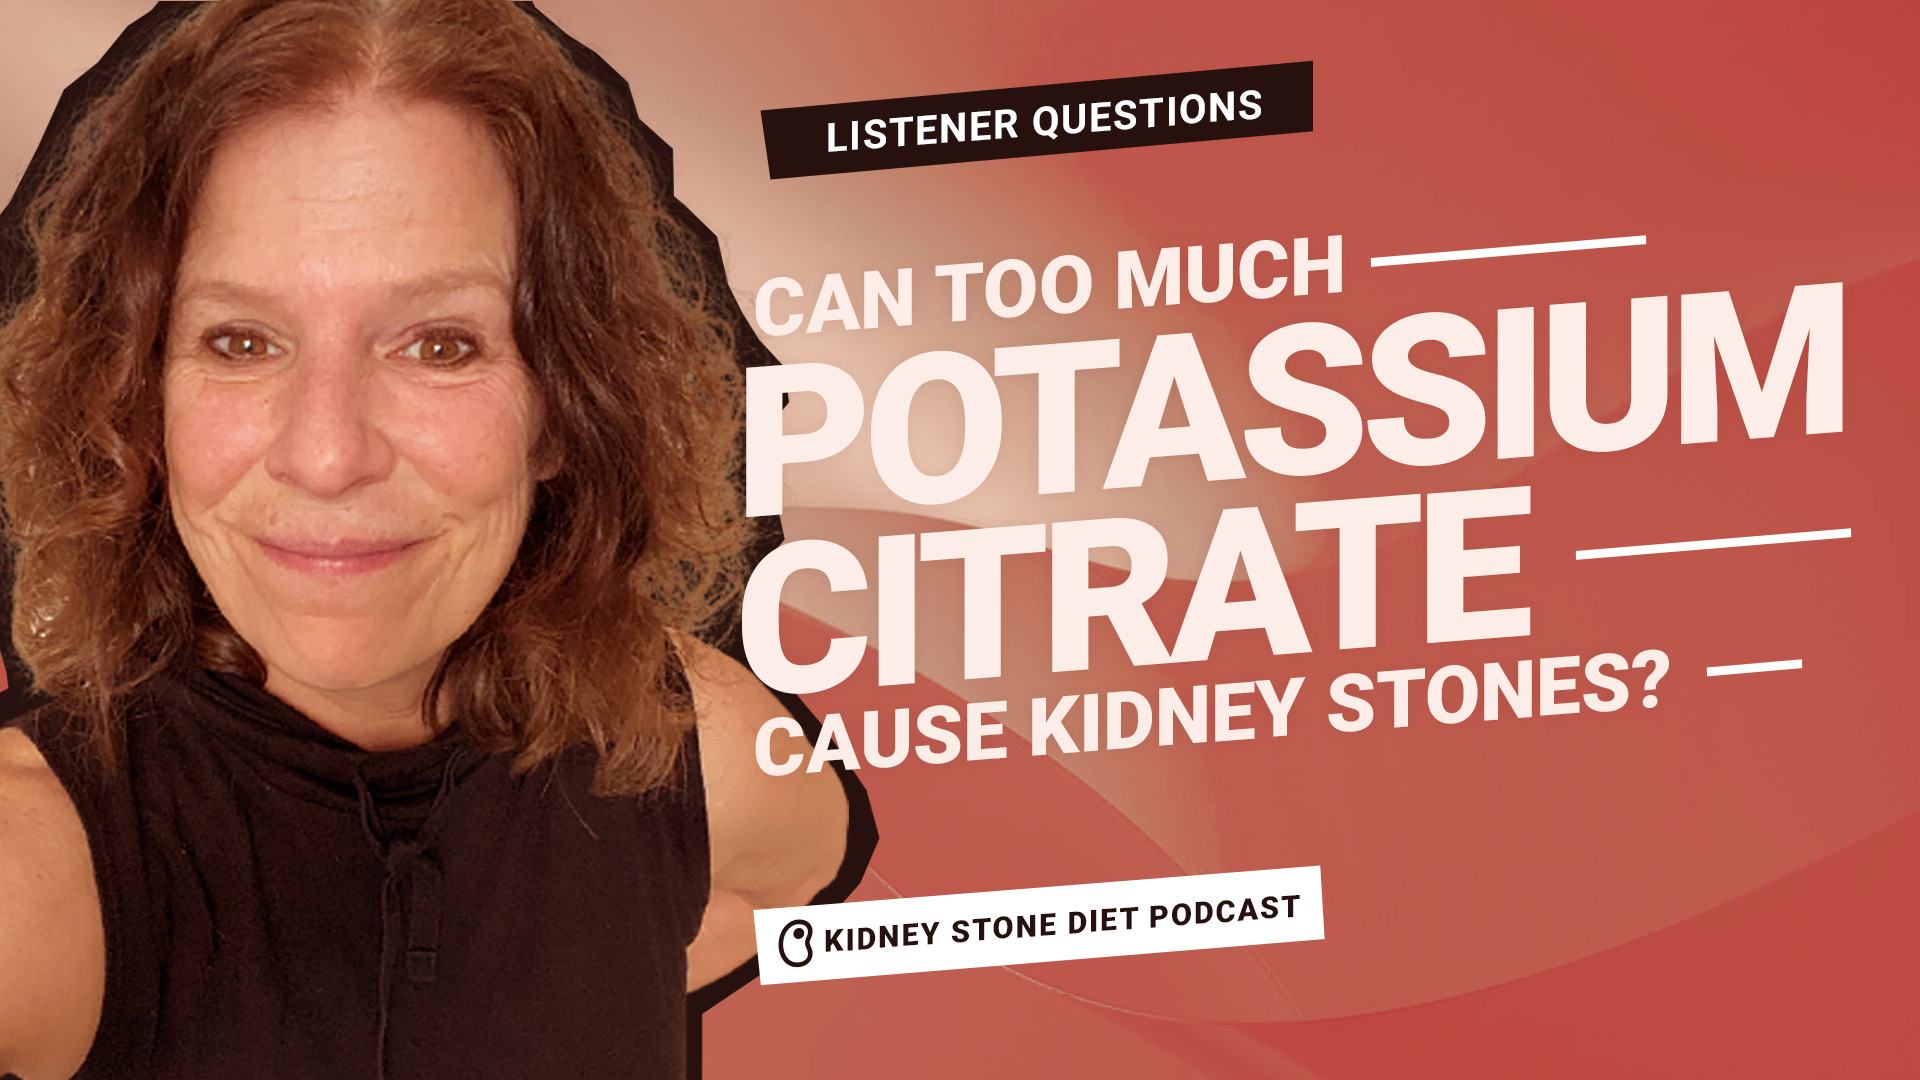 Can too much potassium citrate cause kidney stones?